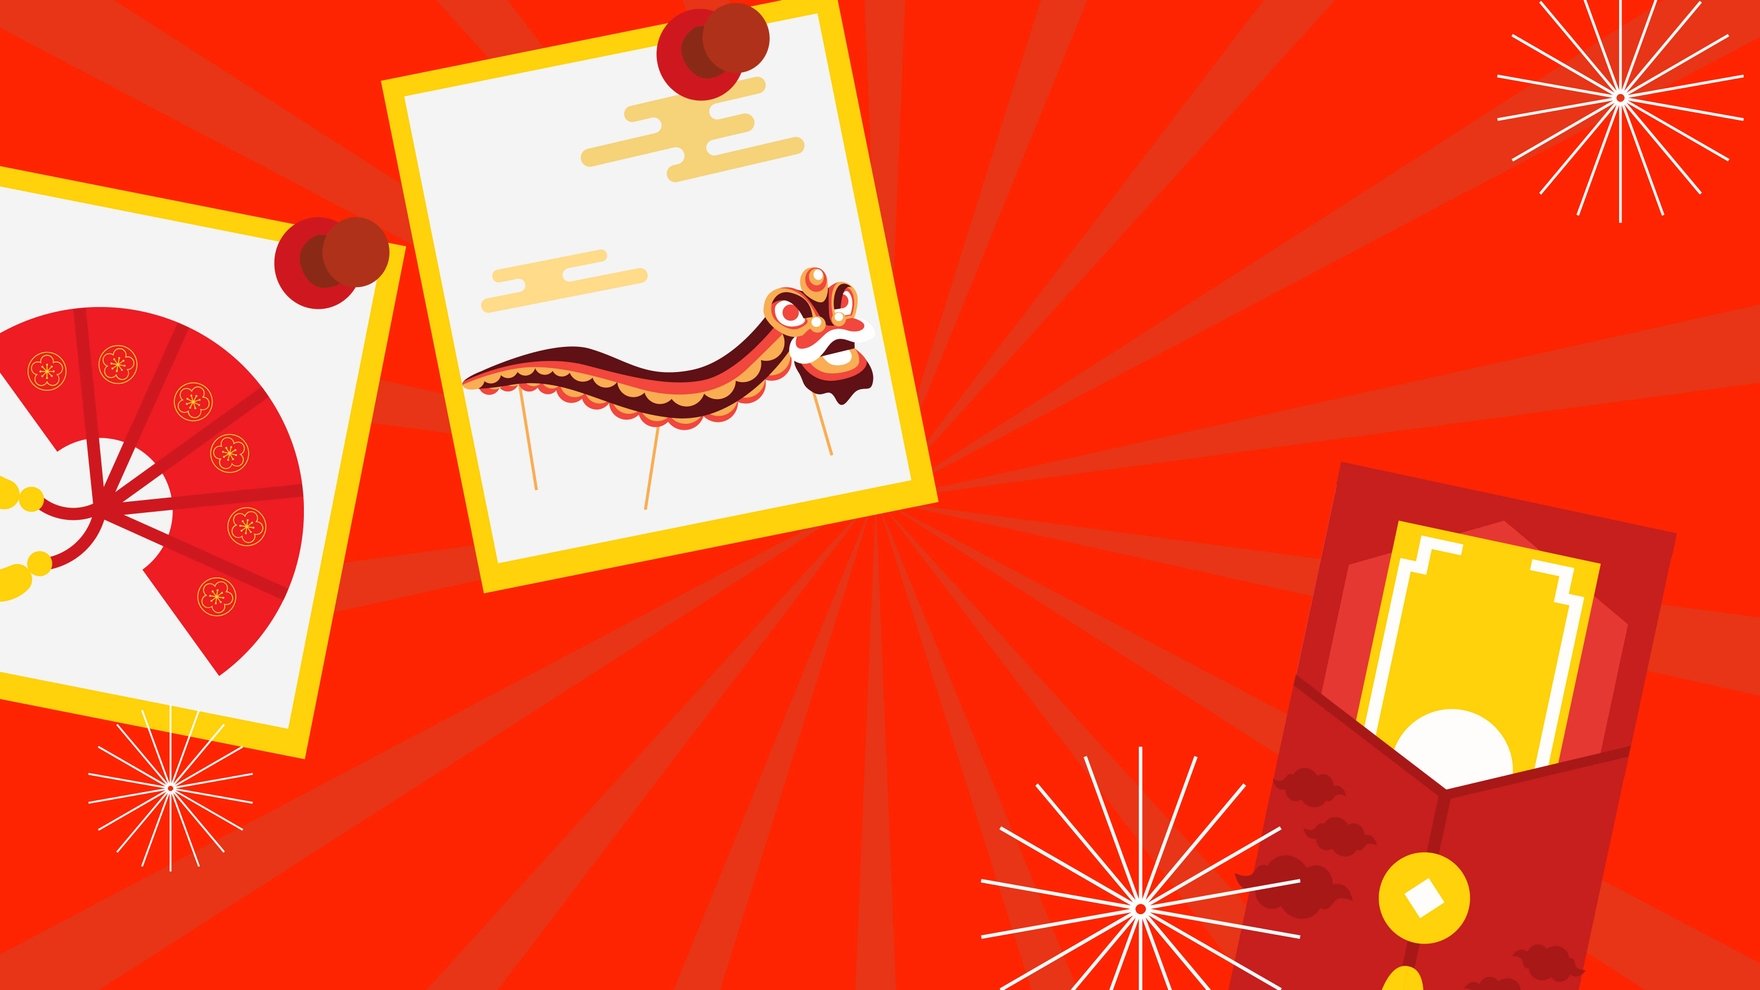 Free Chinese New Year Picture Background in PDF, Illustrator, PSD, EPS, SVG, JPG, PNG